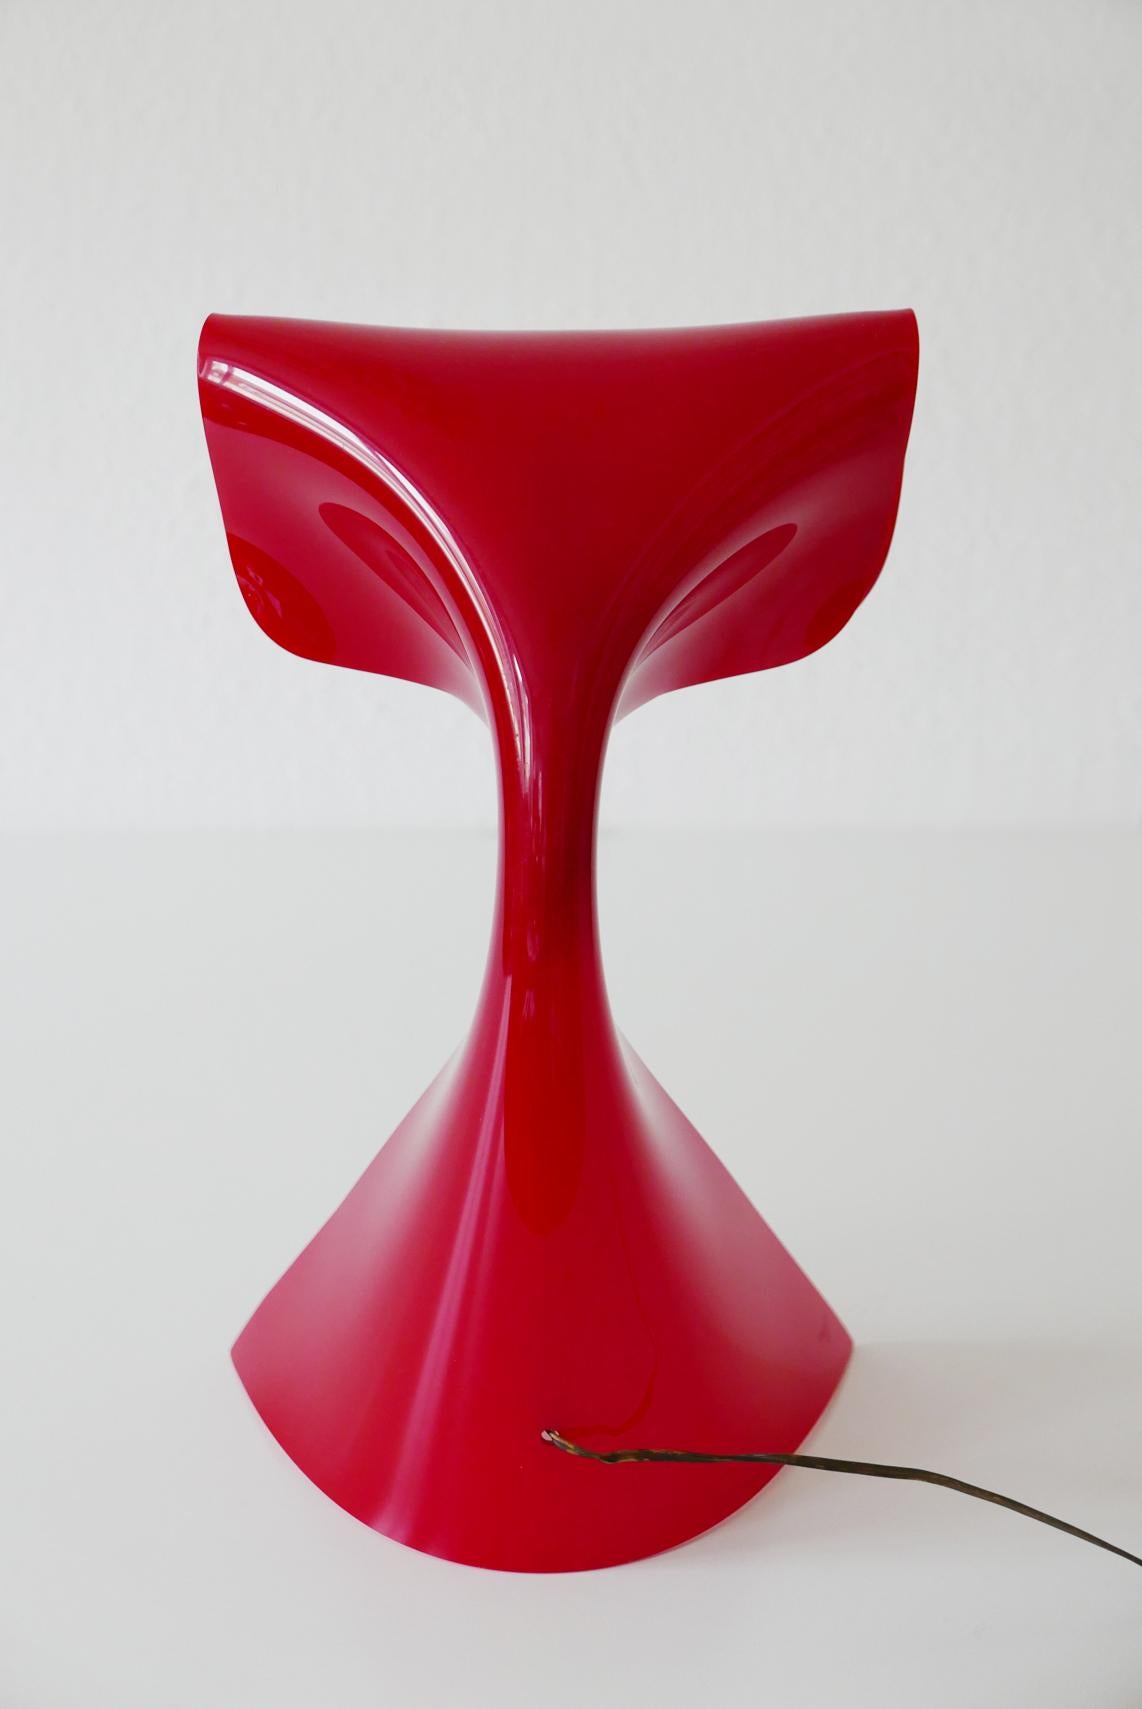 Exceptional Table Lamp by Hanns Hoffmann-Lederer for Heinz Hecht, 1950s, Germany For Sale 10